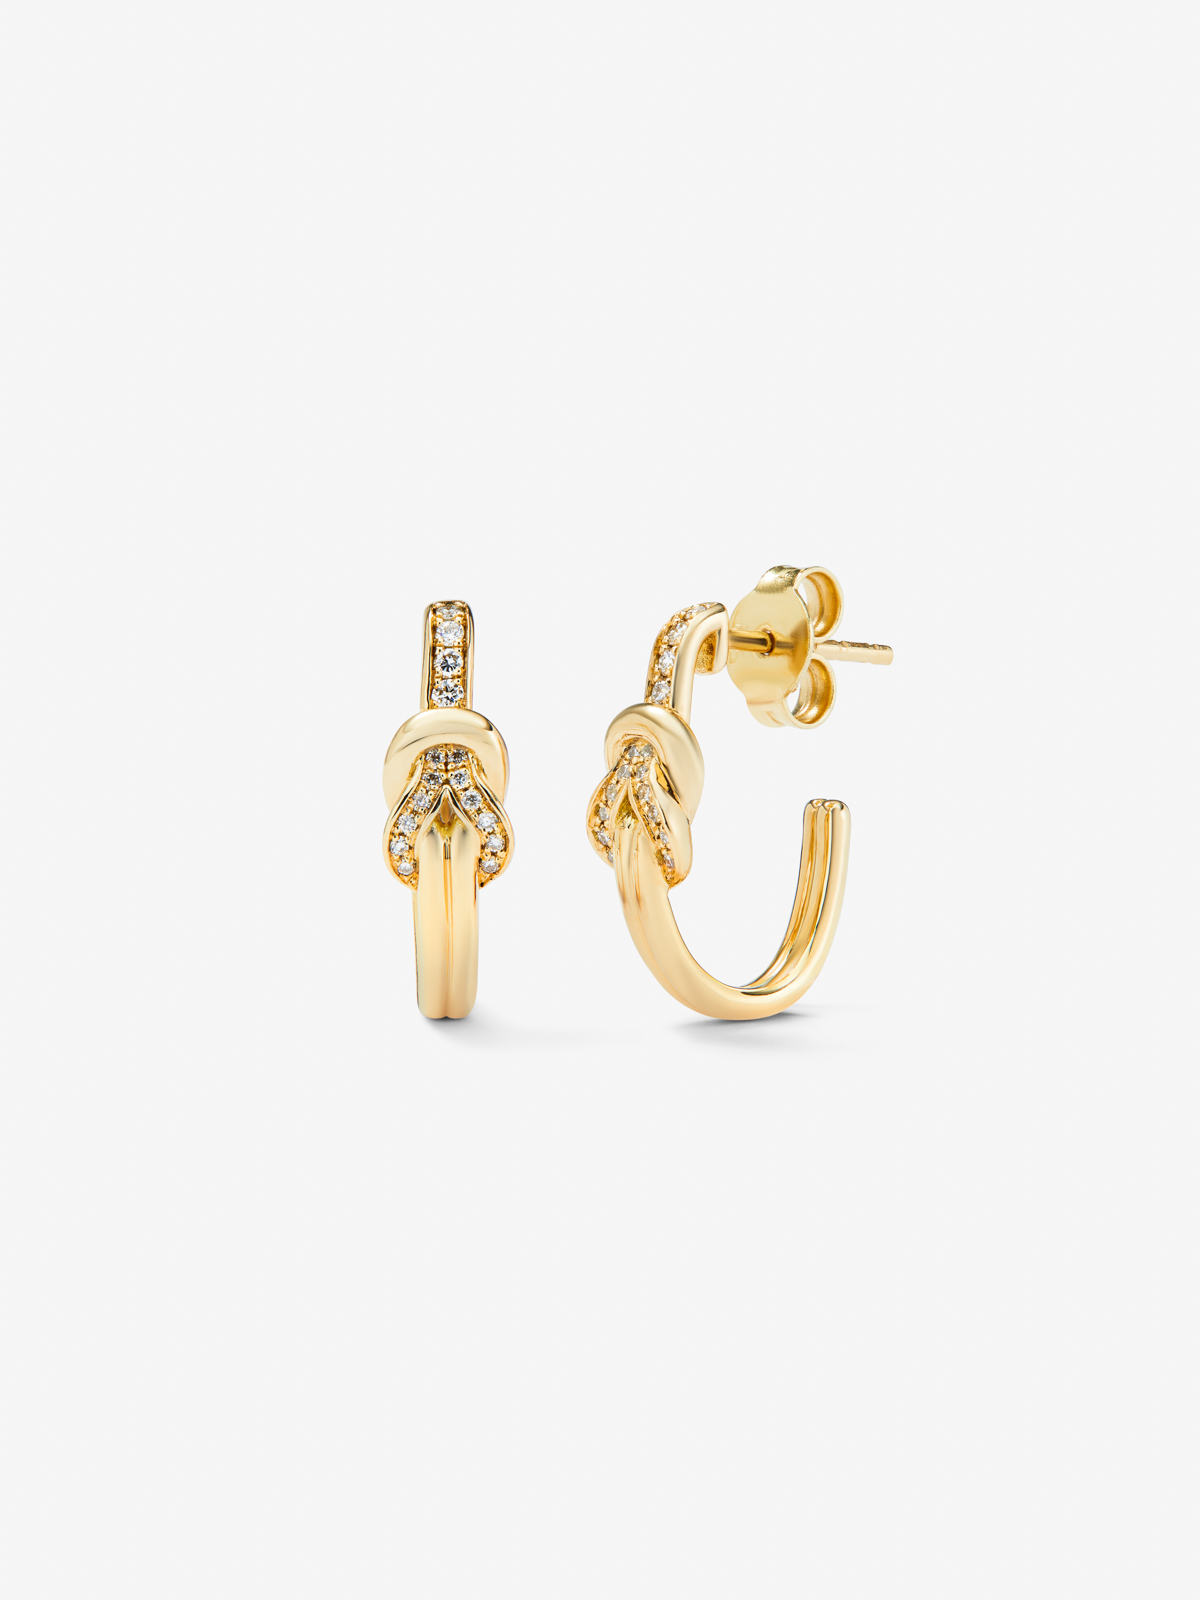 18k yellow gold ring earrings with white diamonds of 0.11 cts and knot shape